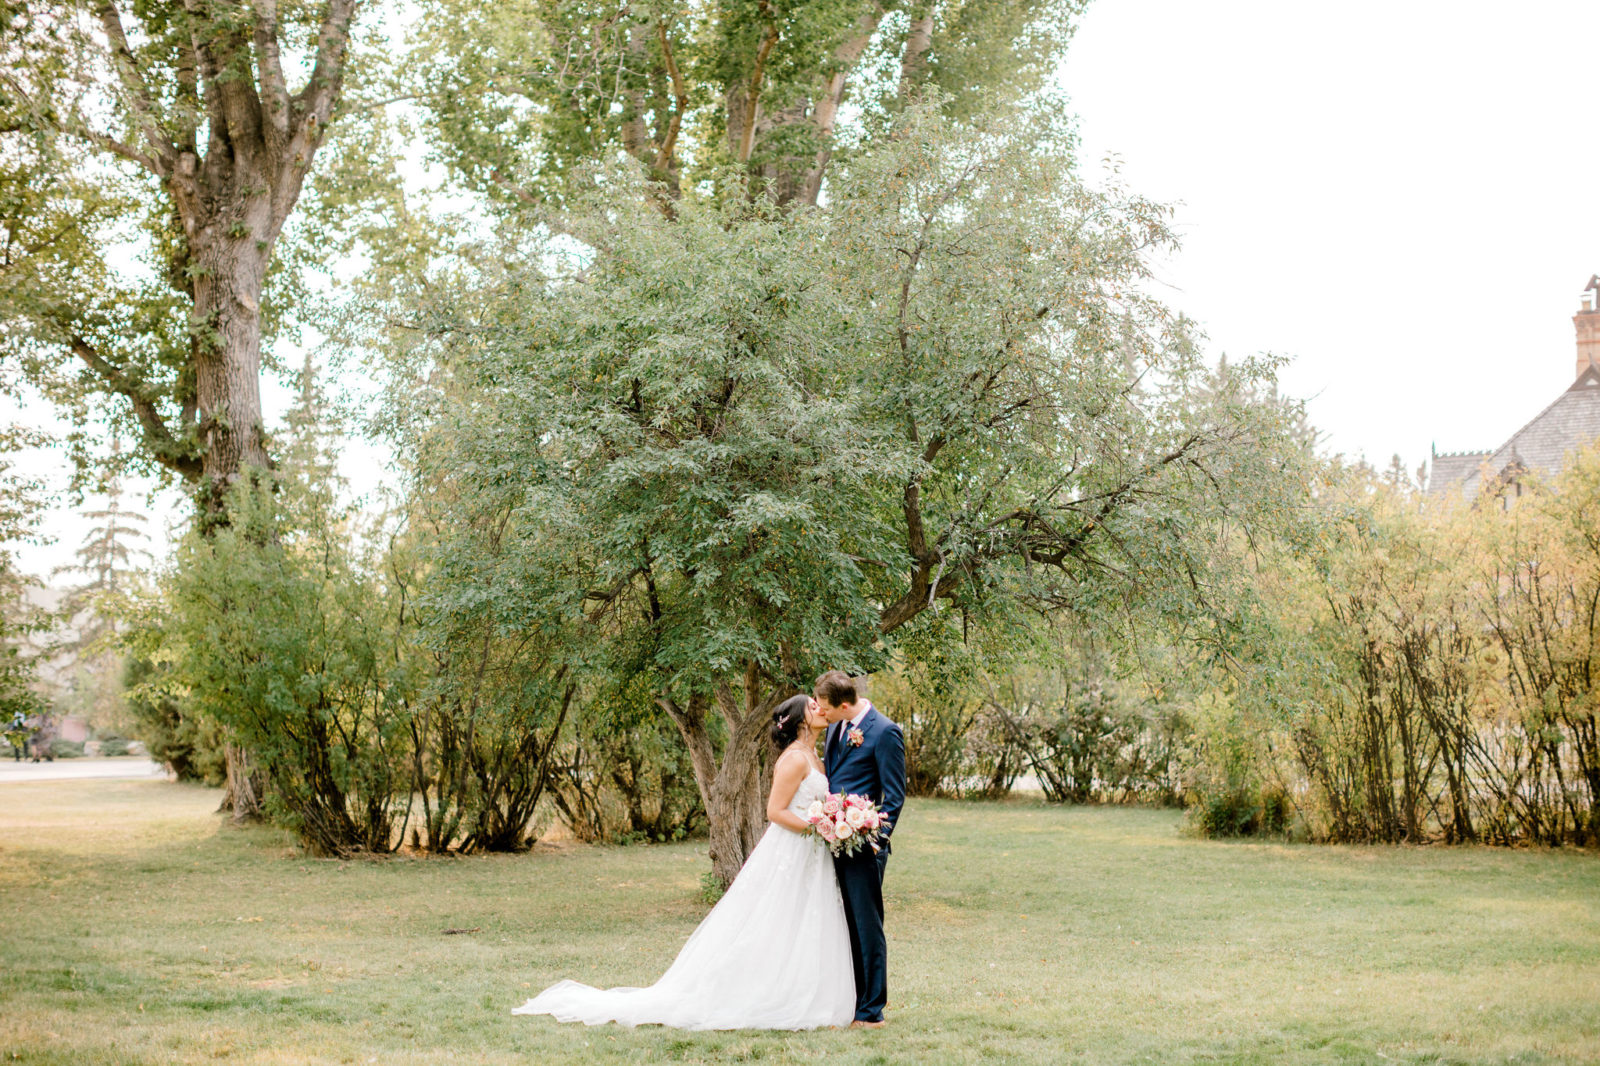 Stunning and romantic bride and groom share a kiss on their wedding day in a Calgary Alberta park